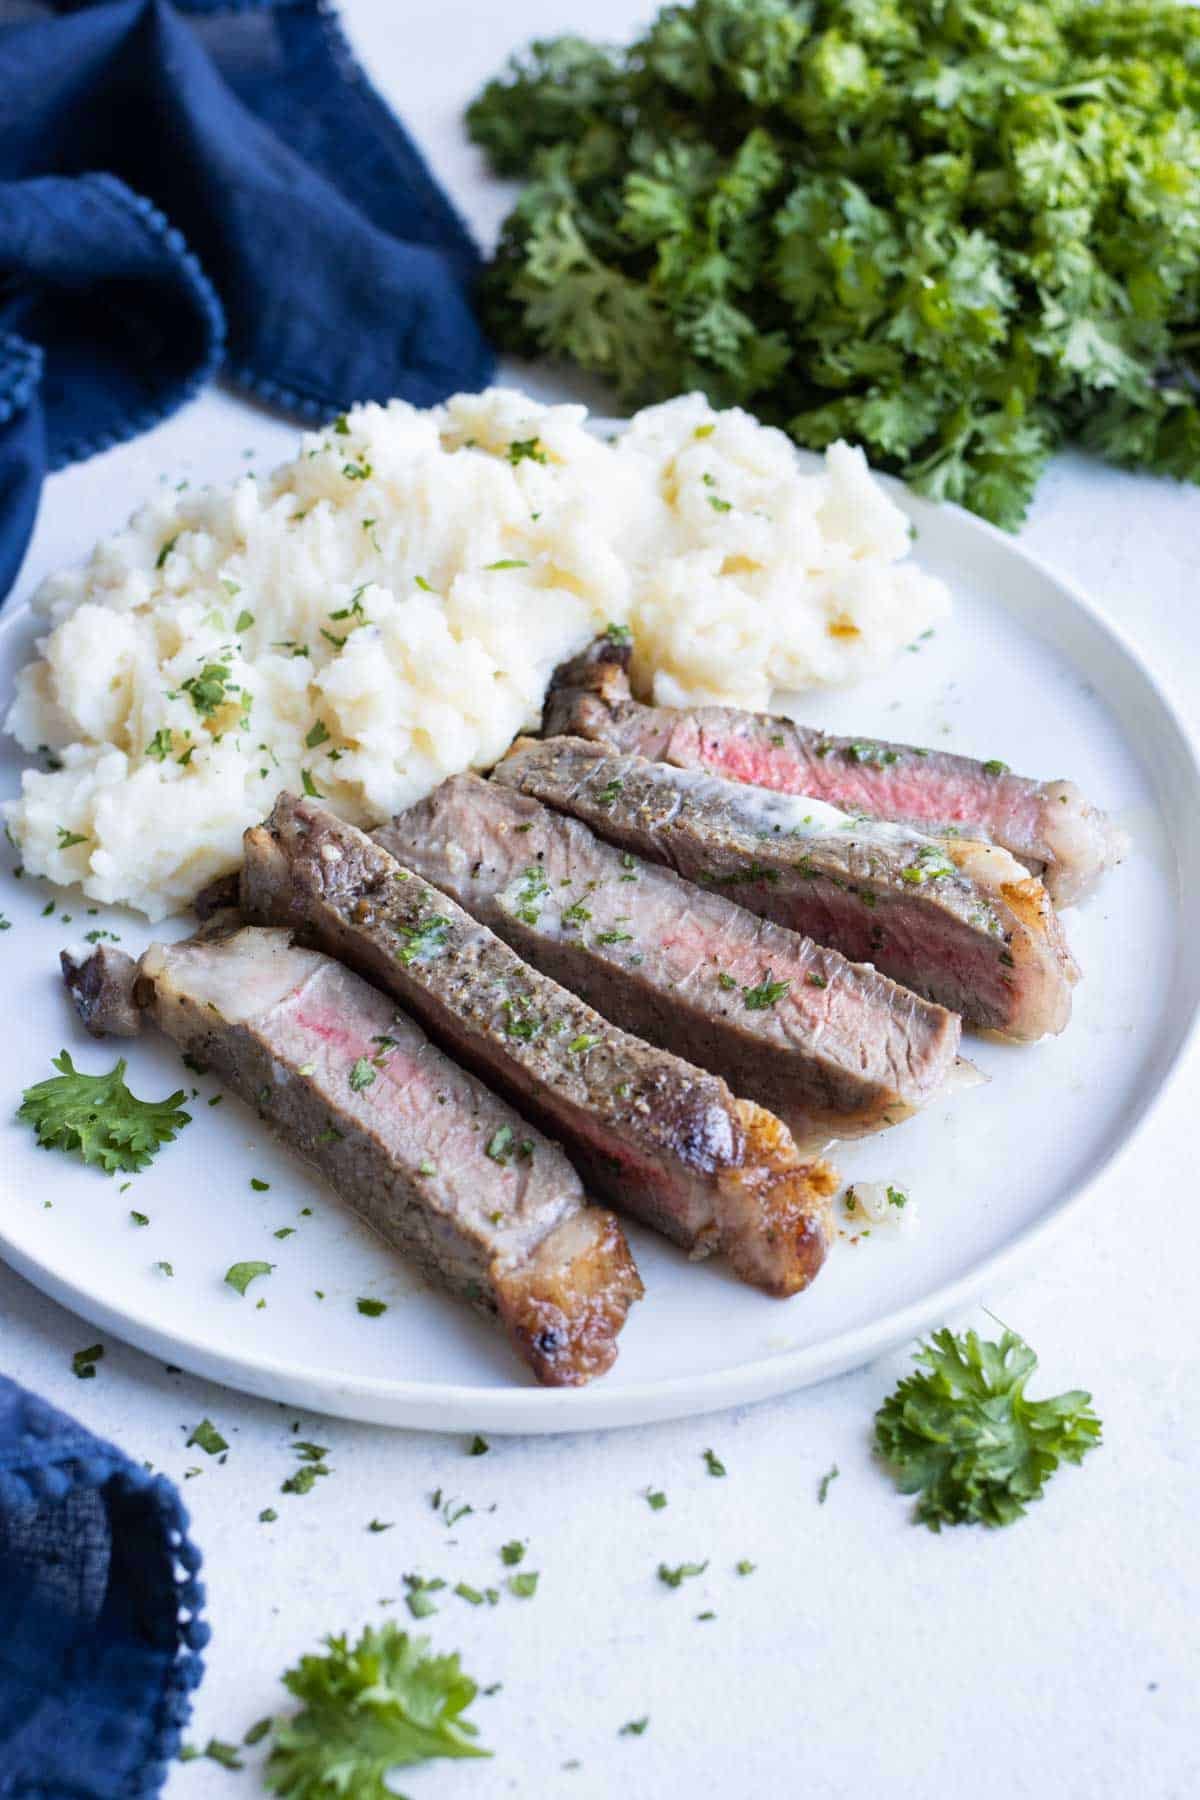 Sliced steak is served with mashed potatoes.